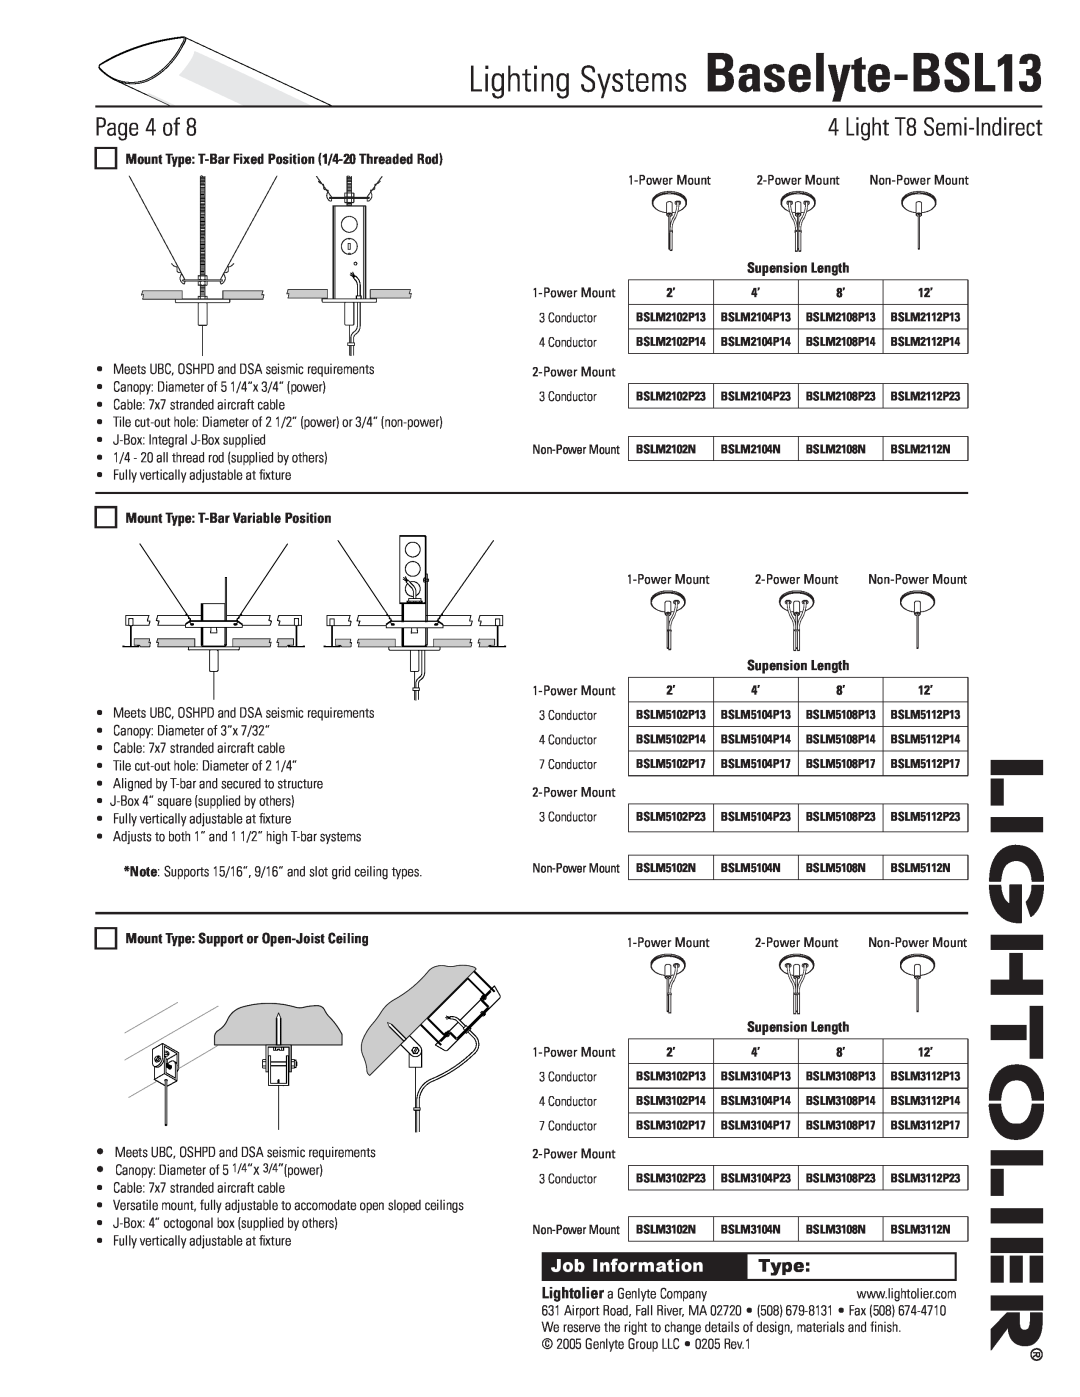 Lightolier Baselyte-BSL13 Page of, Mount Type: T-BarVariable Position, Mount Type Support or Open-JoistCeiling 